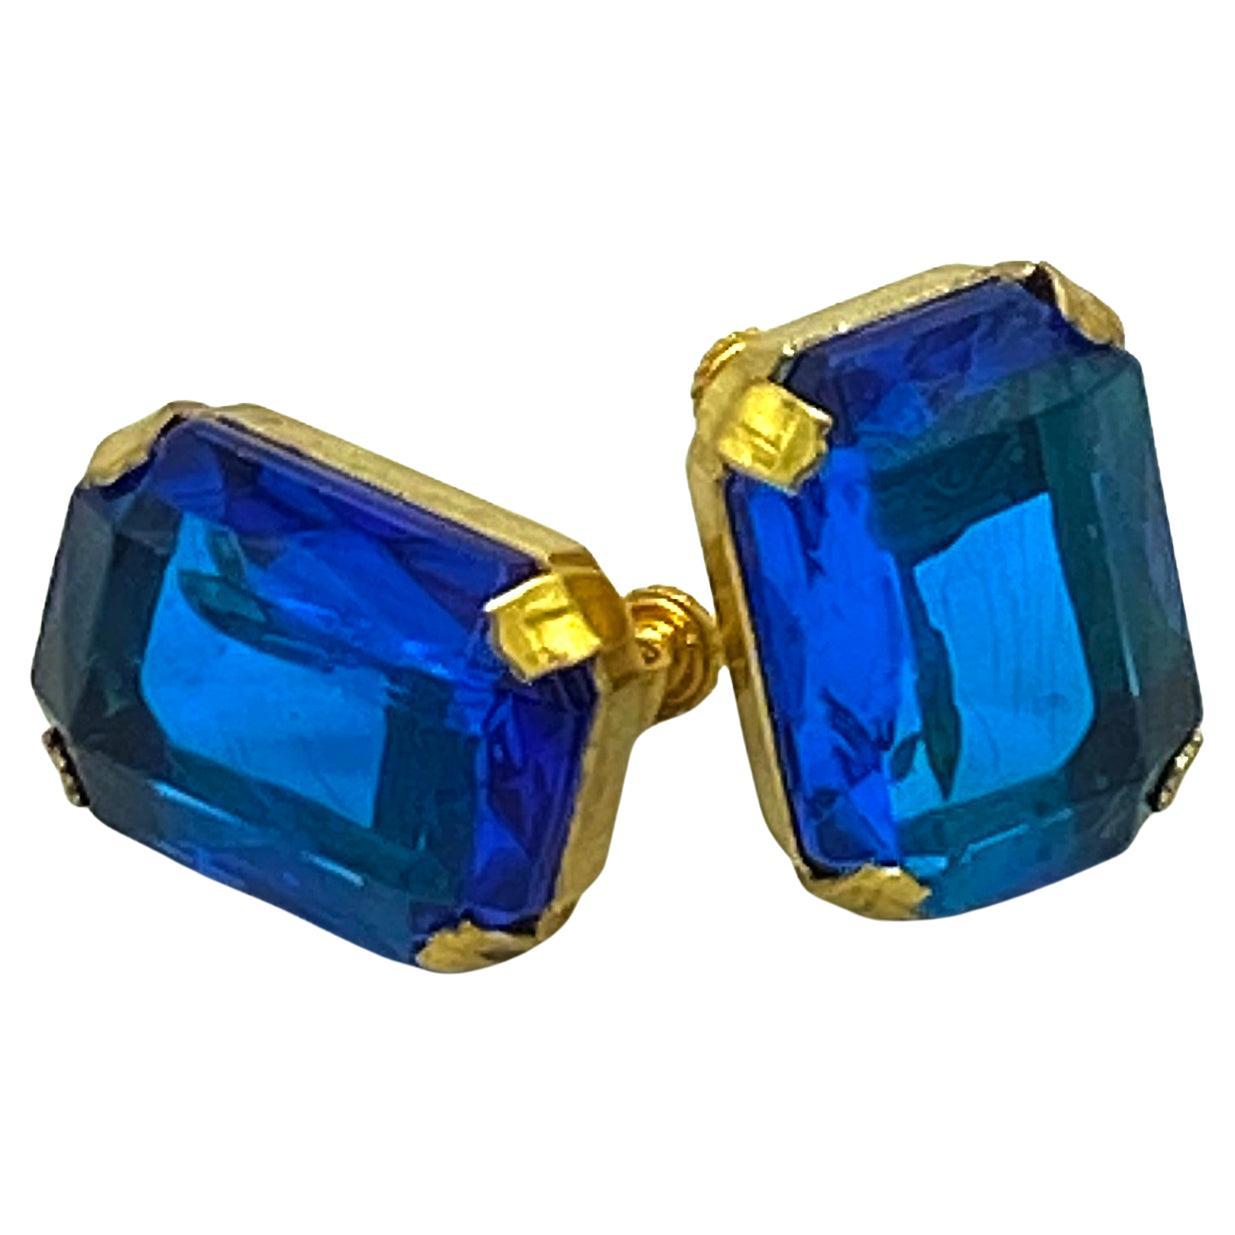 Emerald-Cut Blue Earrings with Miriam Haskell Mark  For Sale